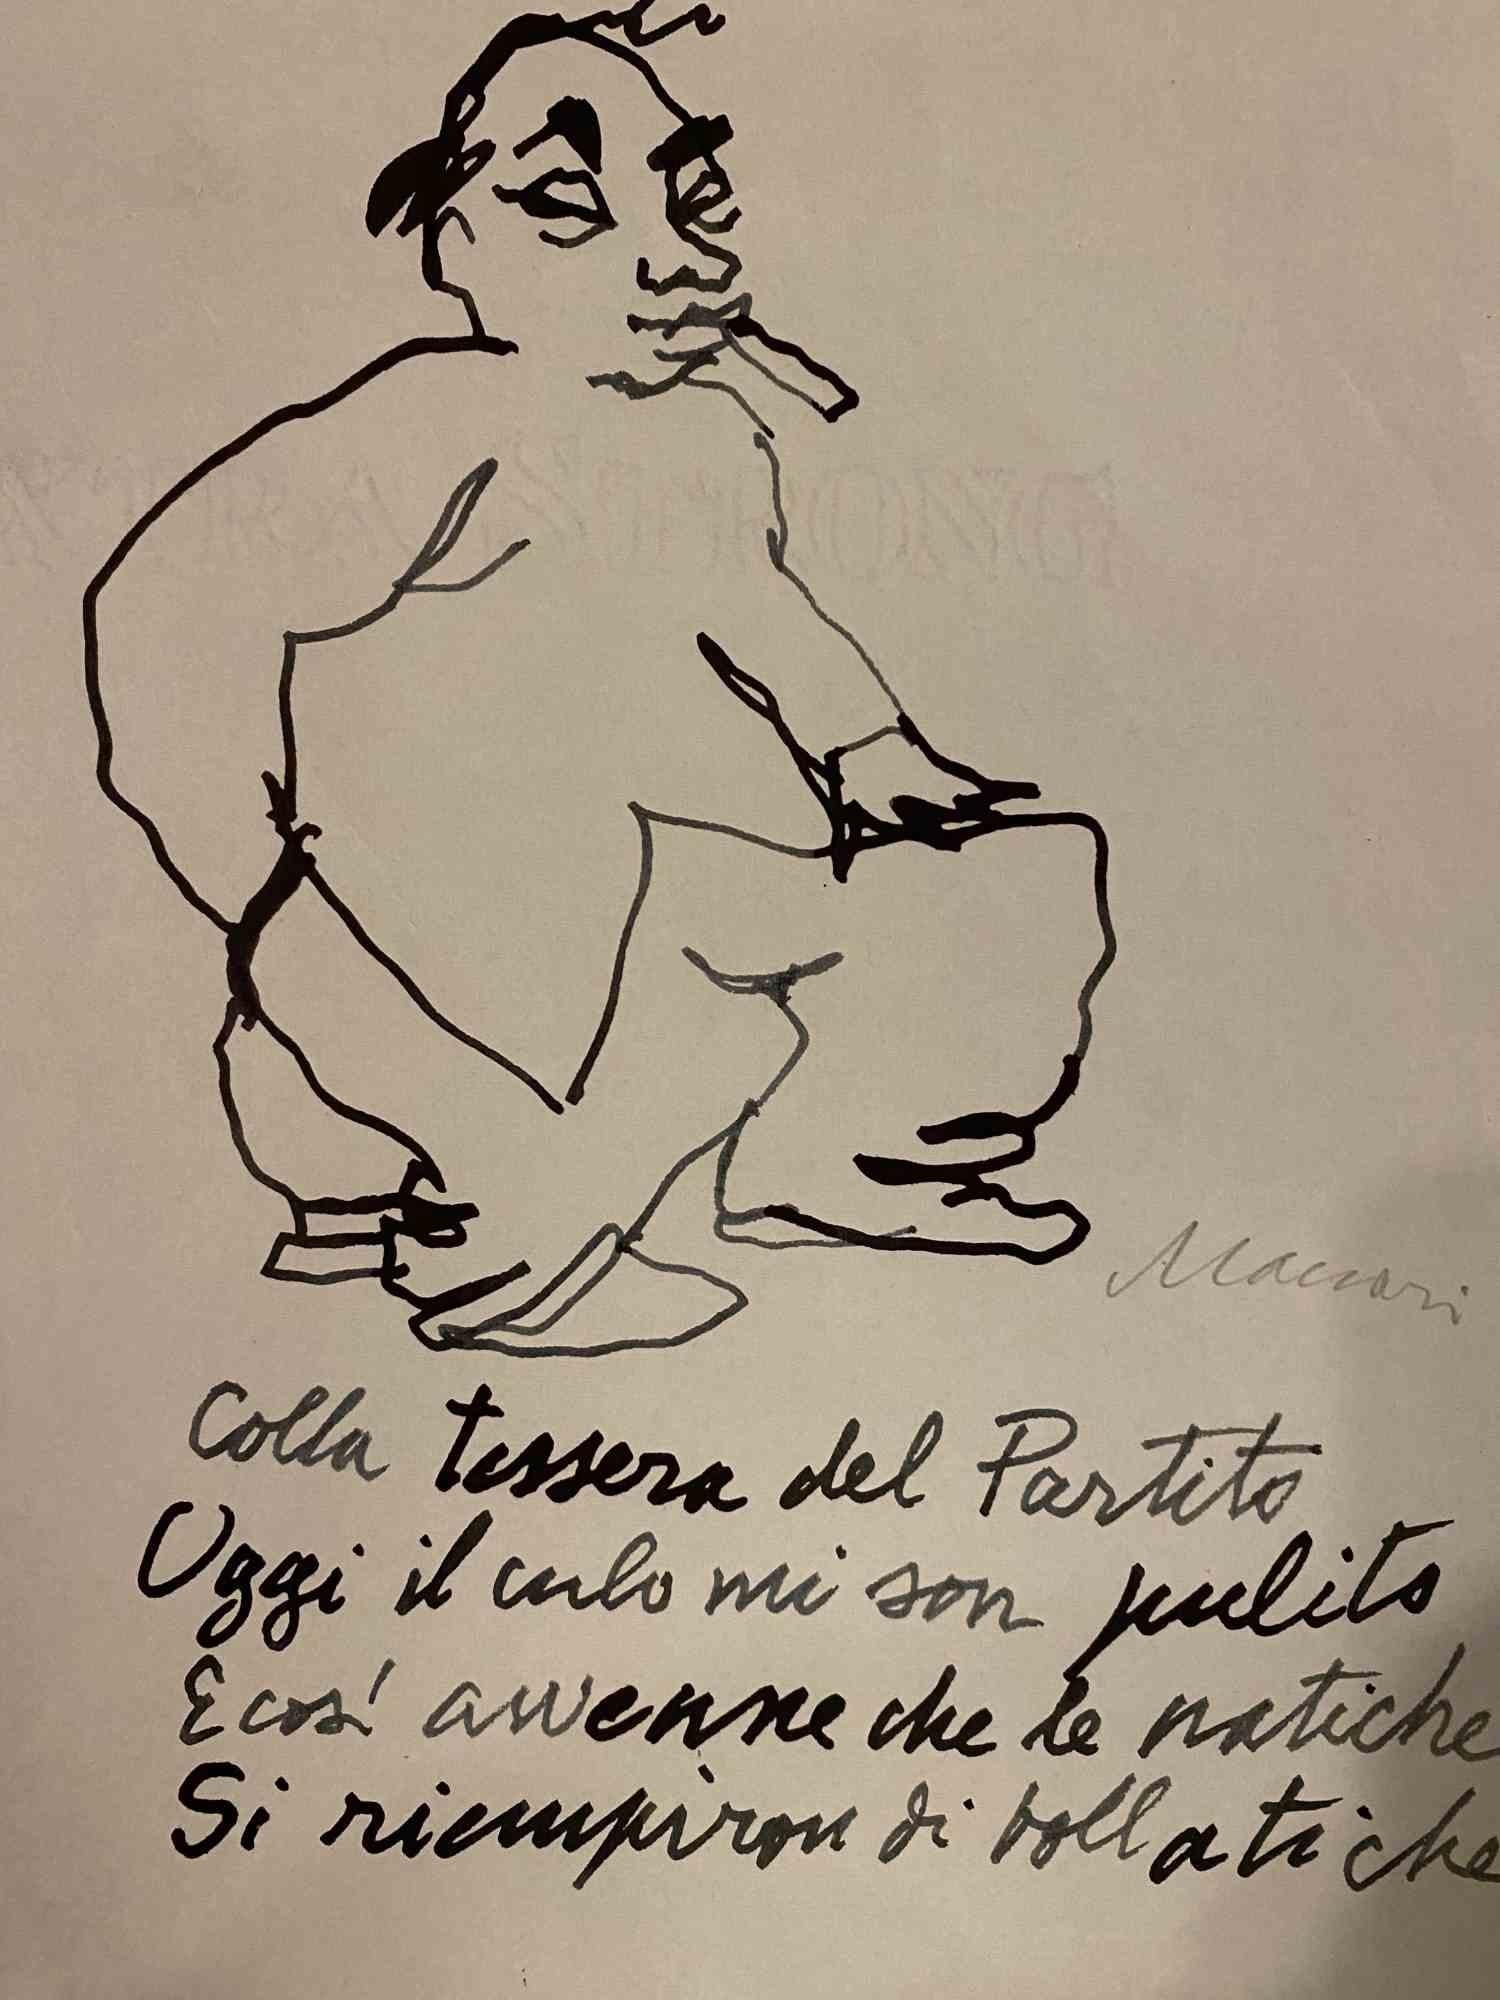 The Poet With  Poem is a pen Drawing realized by Mino Maccari in the 1975s.

Hand-signed on the lower in pencil.

Good condition with slight folding.

The artwork is represented through confident deft and expressive strokes.

Mino Maccari